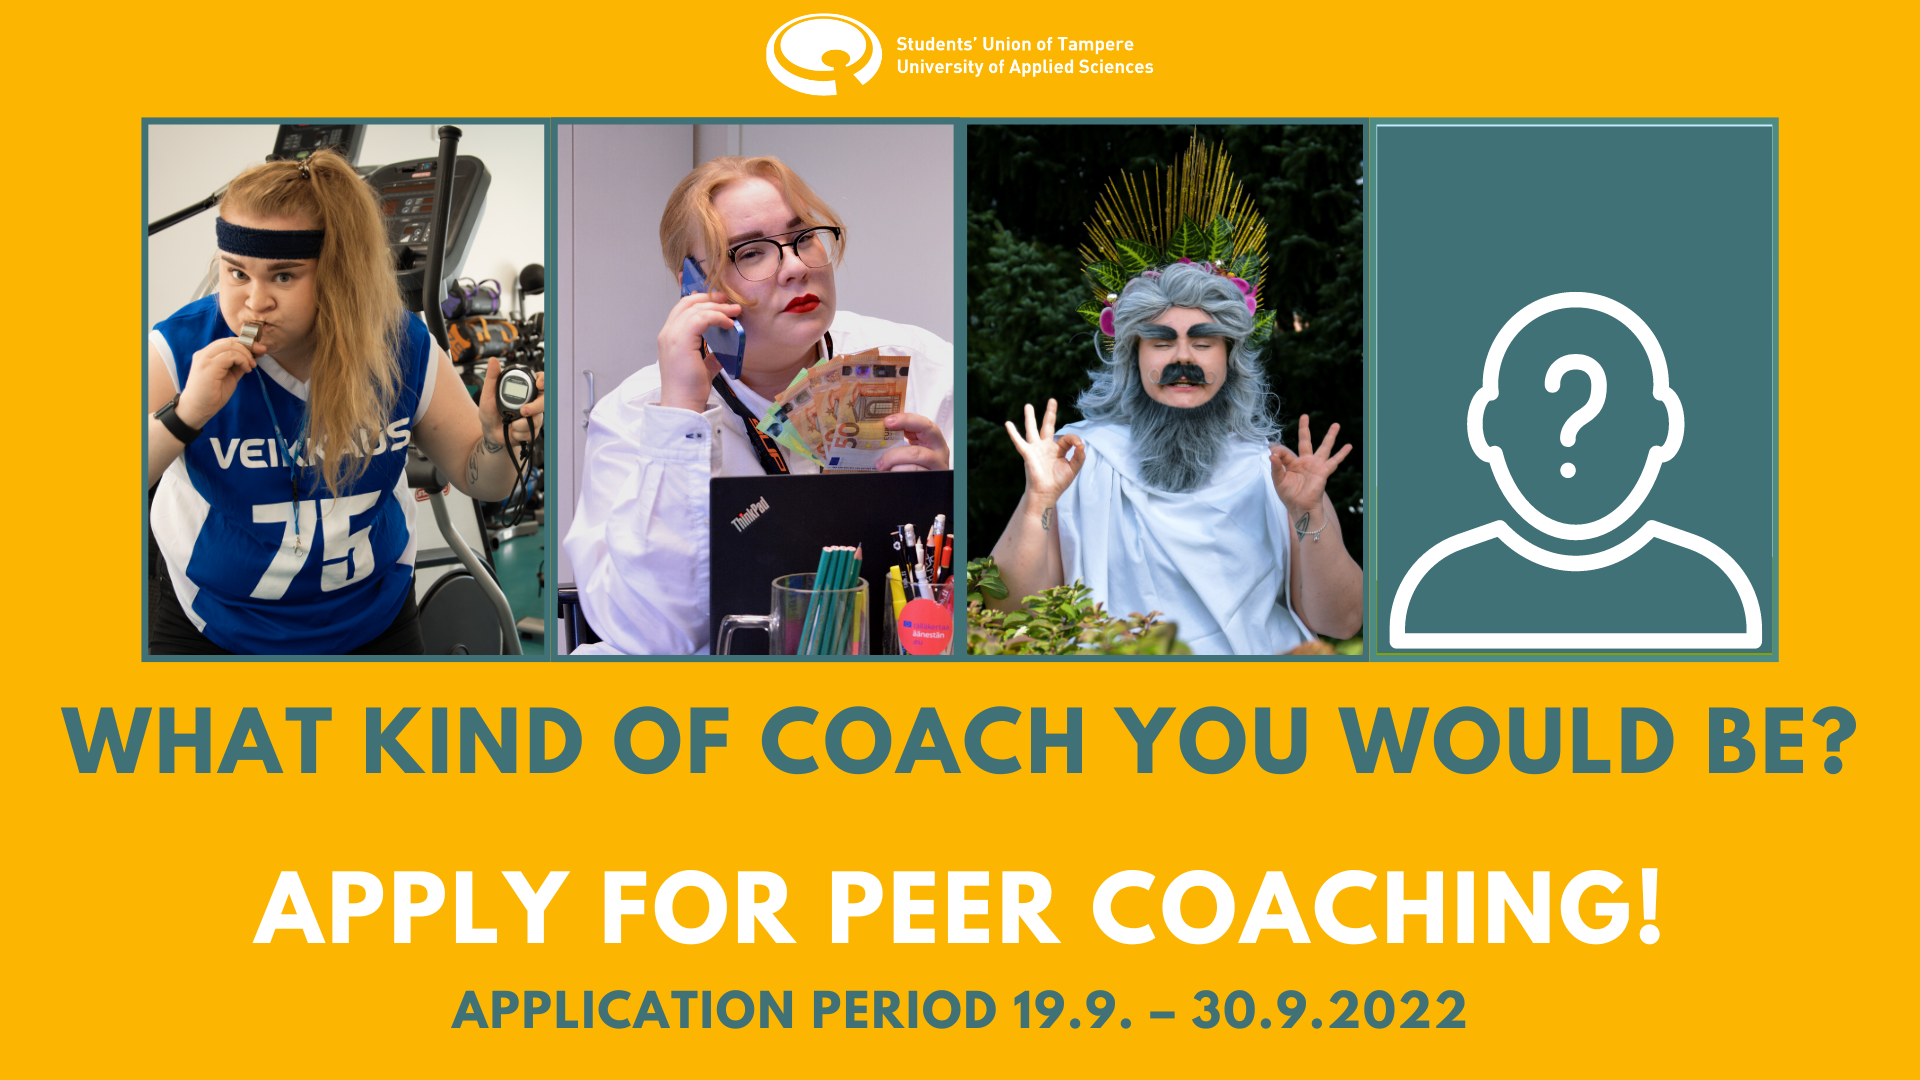 BECOME A PEER COACH! AUTUMN 2022 APPLICATION PERIOD HAS STARTED!